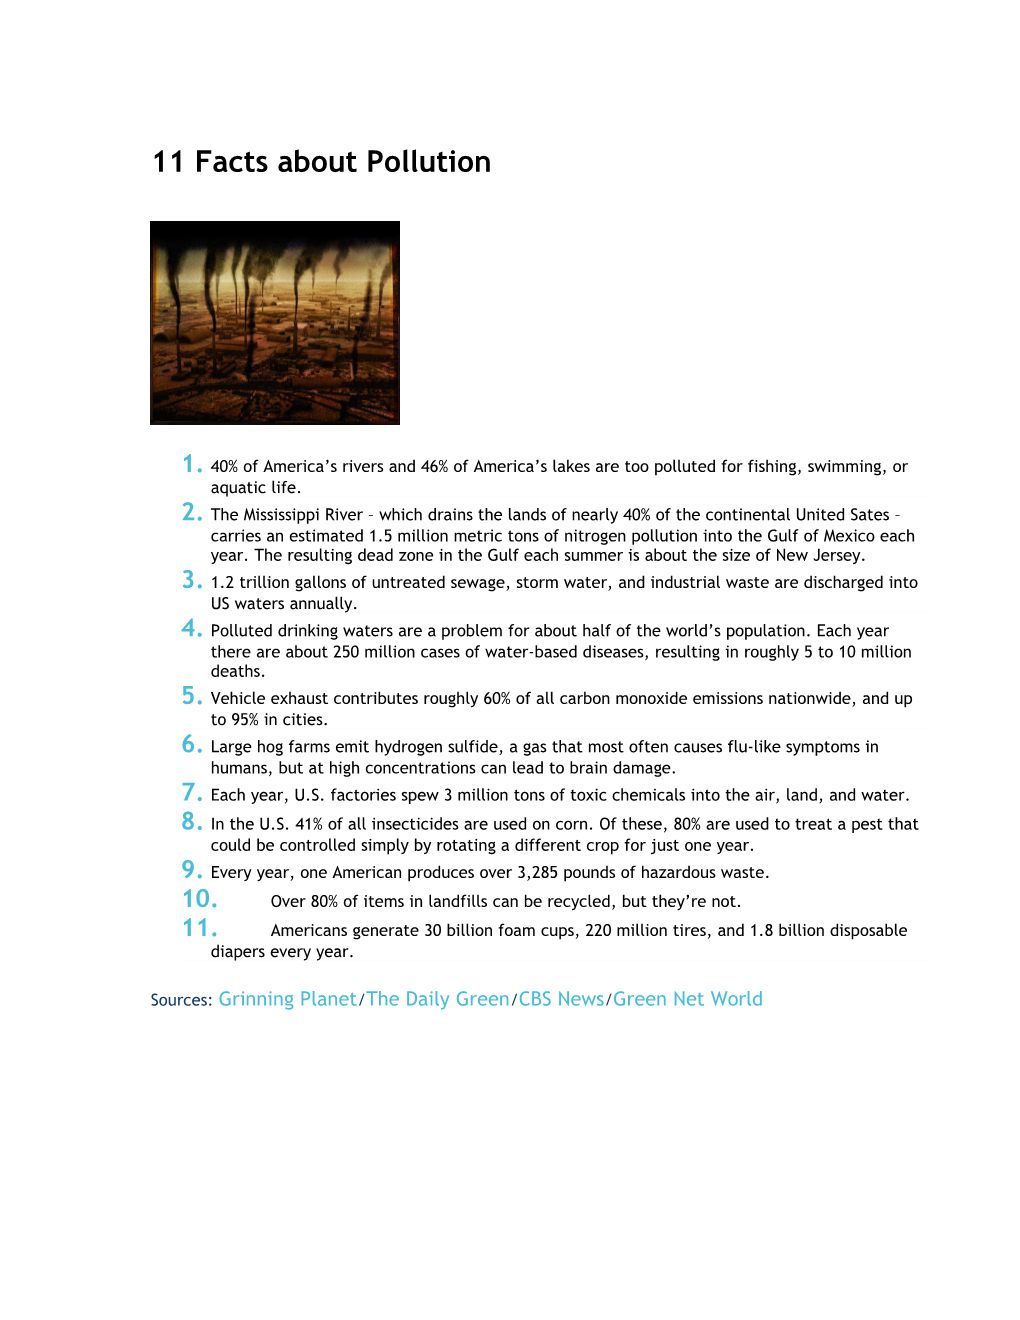 11 Facts About Pollution